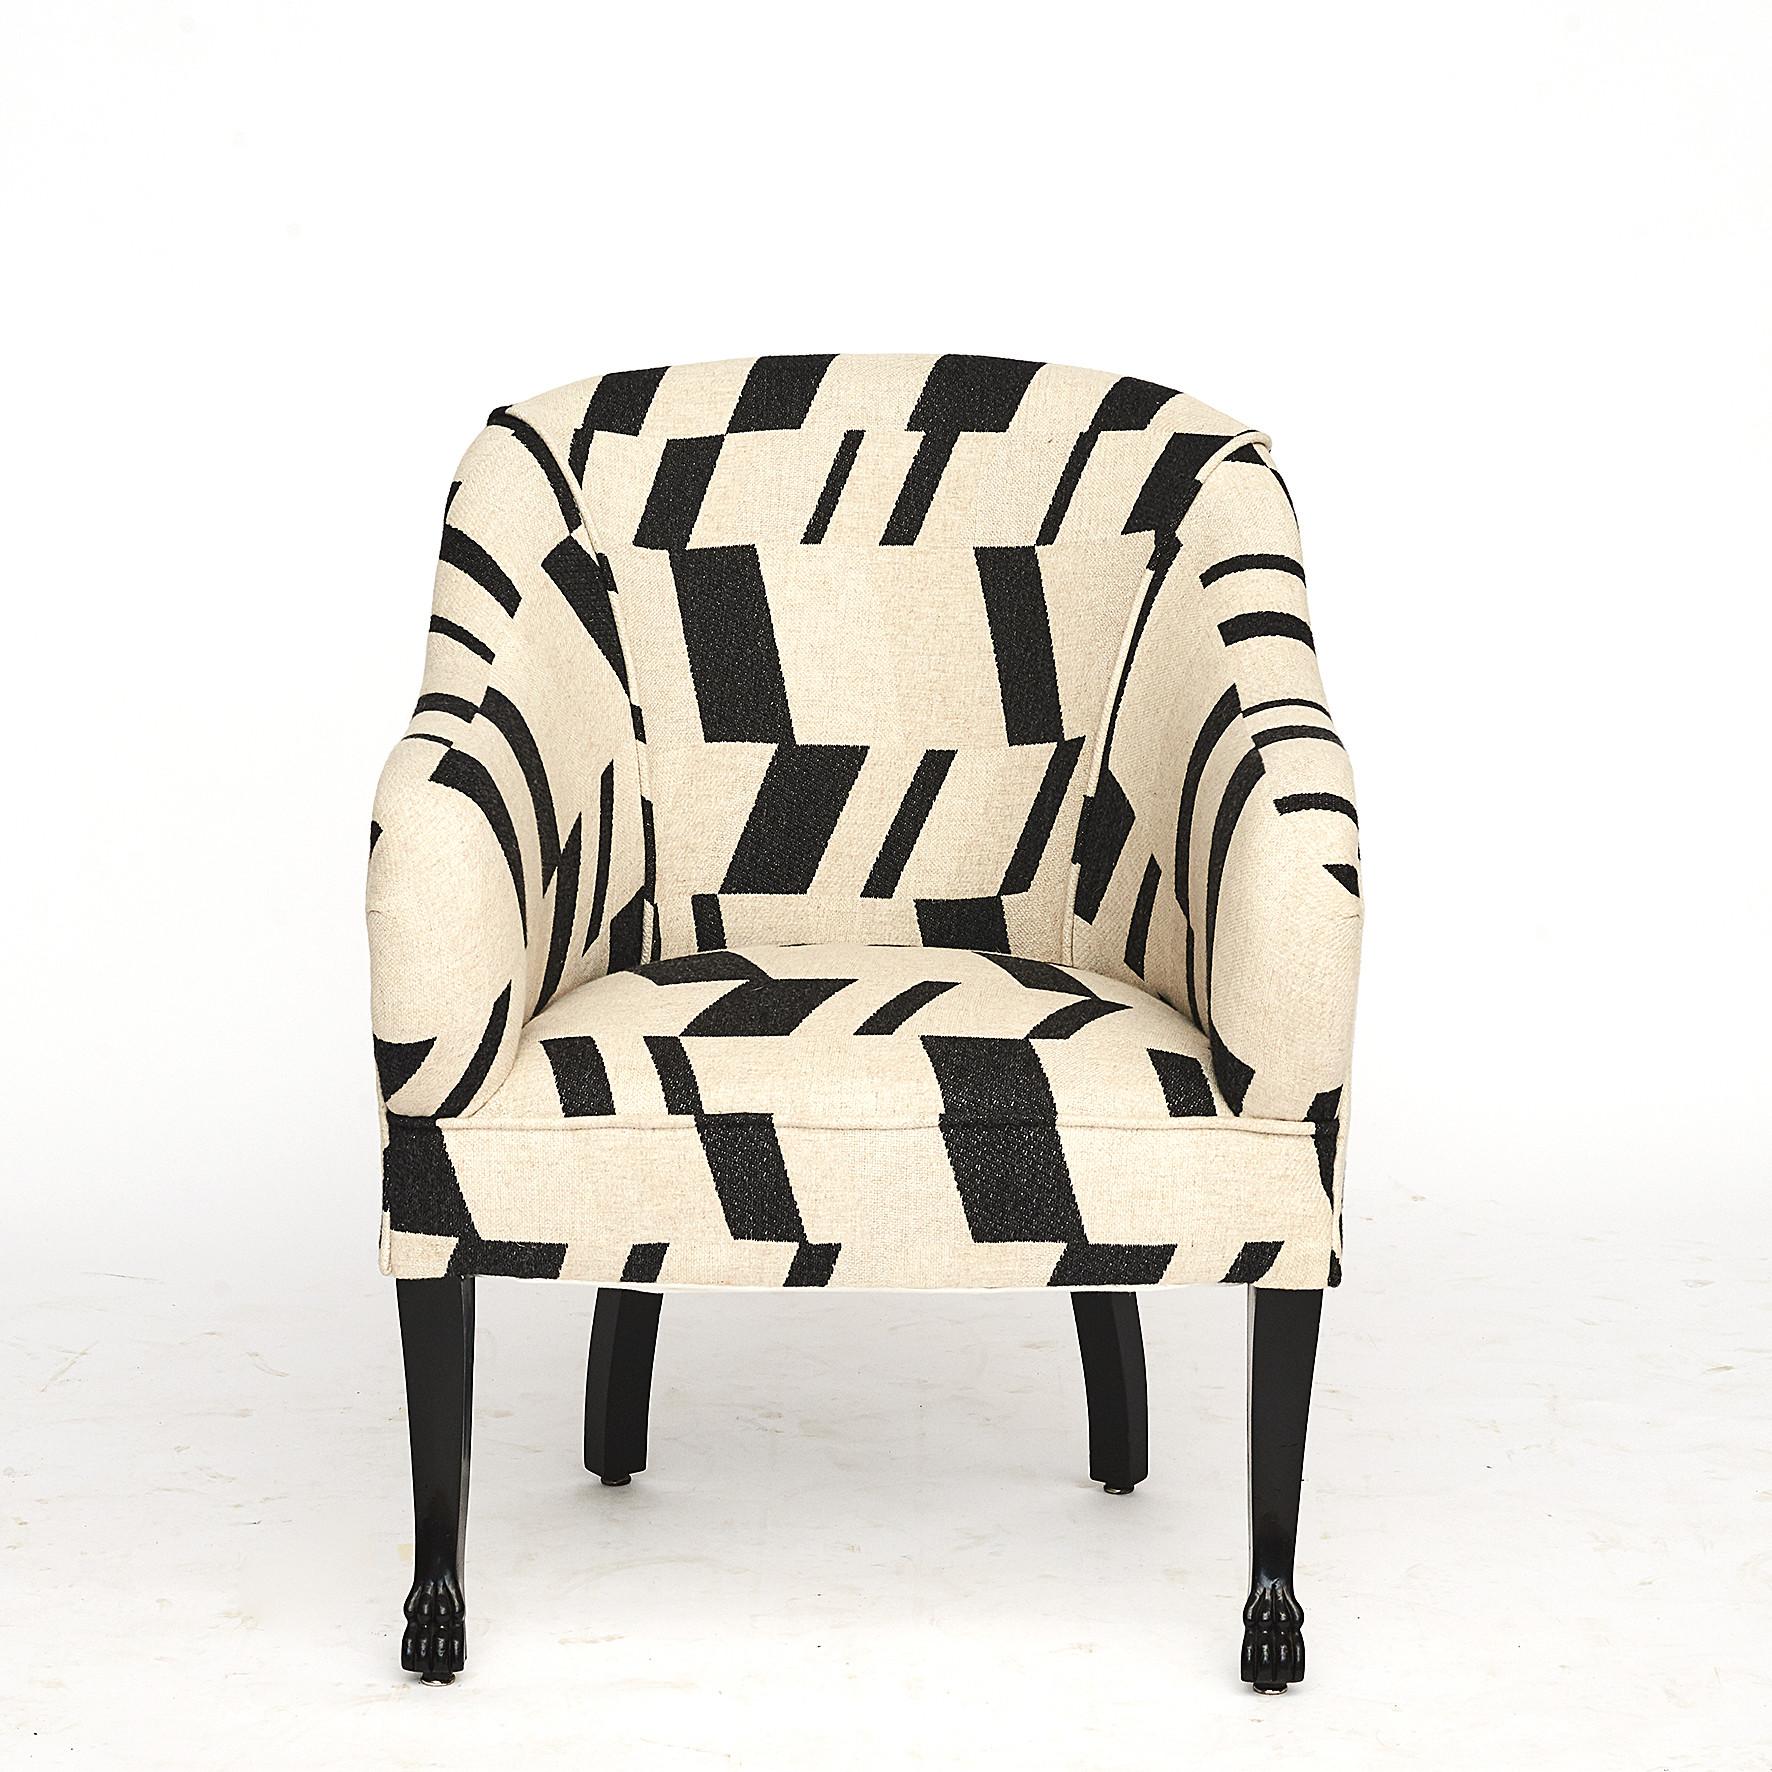 Pair of Danish Art Deco easy chairs, Denmark, circa 1920.
Black lacquer mahogany legs ending in animal paws. Coil springs in the seat.

Upholstered with graphic monochrome pattern high quality fabric from Nobilis.
The chairs are extremely